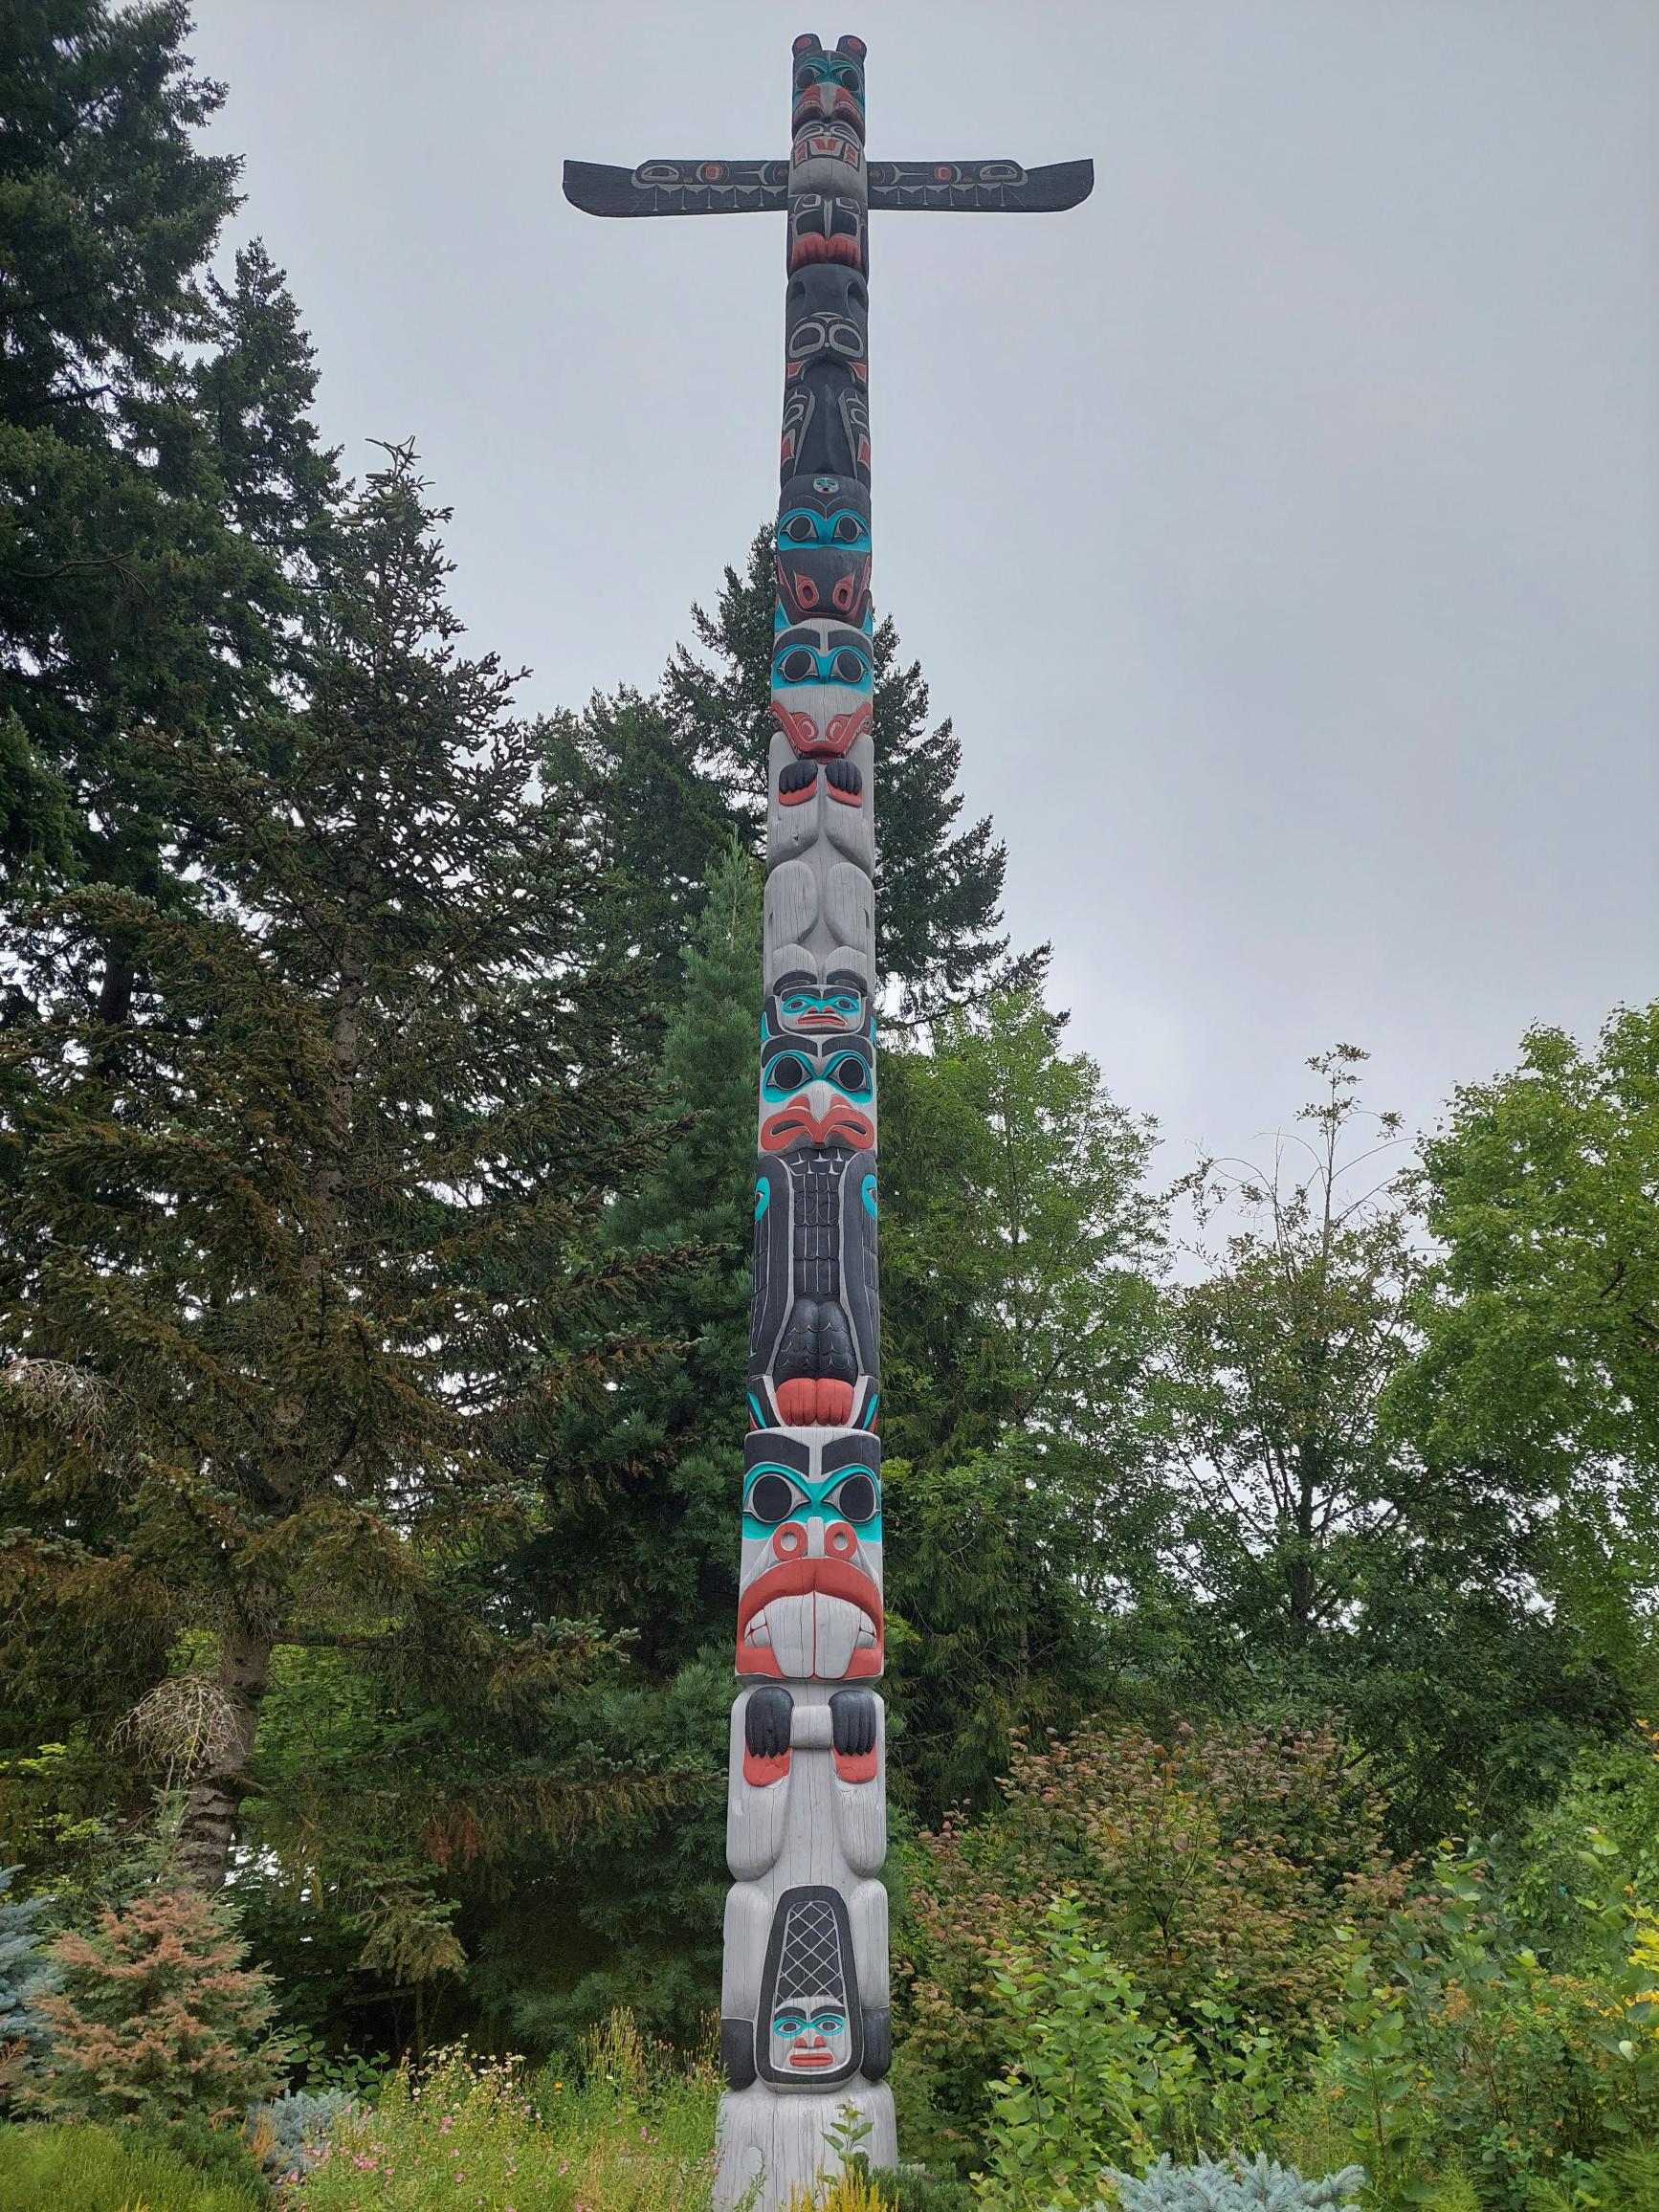 totem pole in oregon with greenery